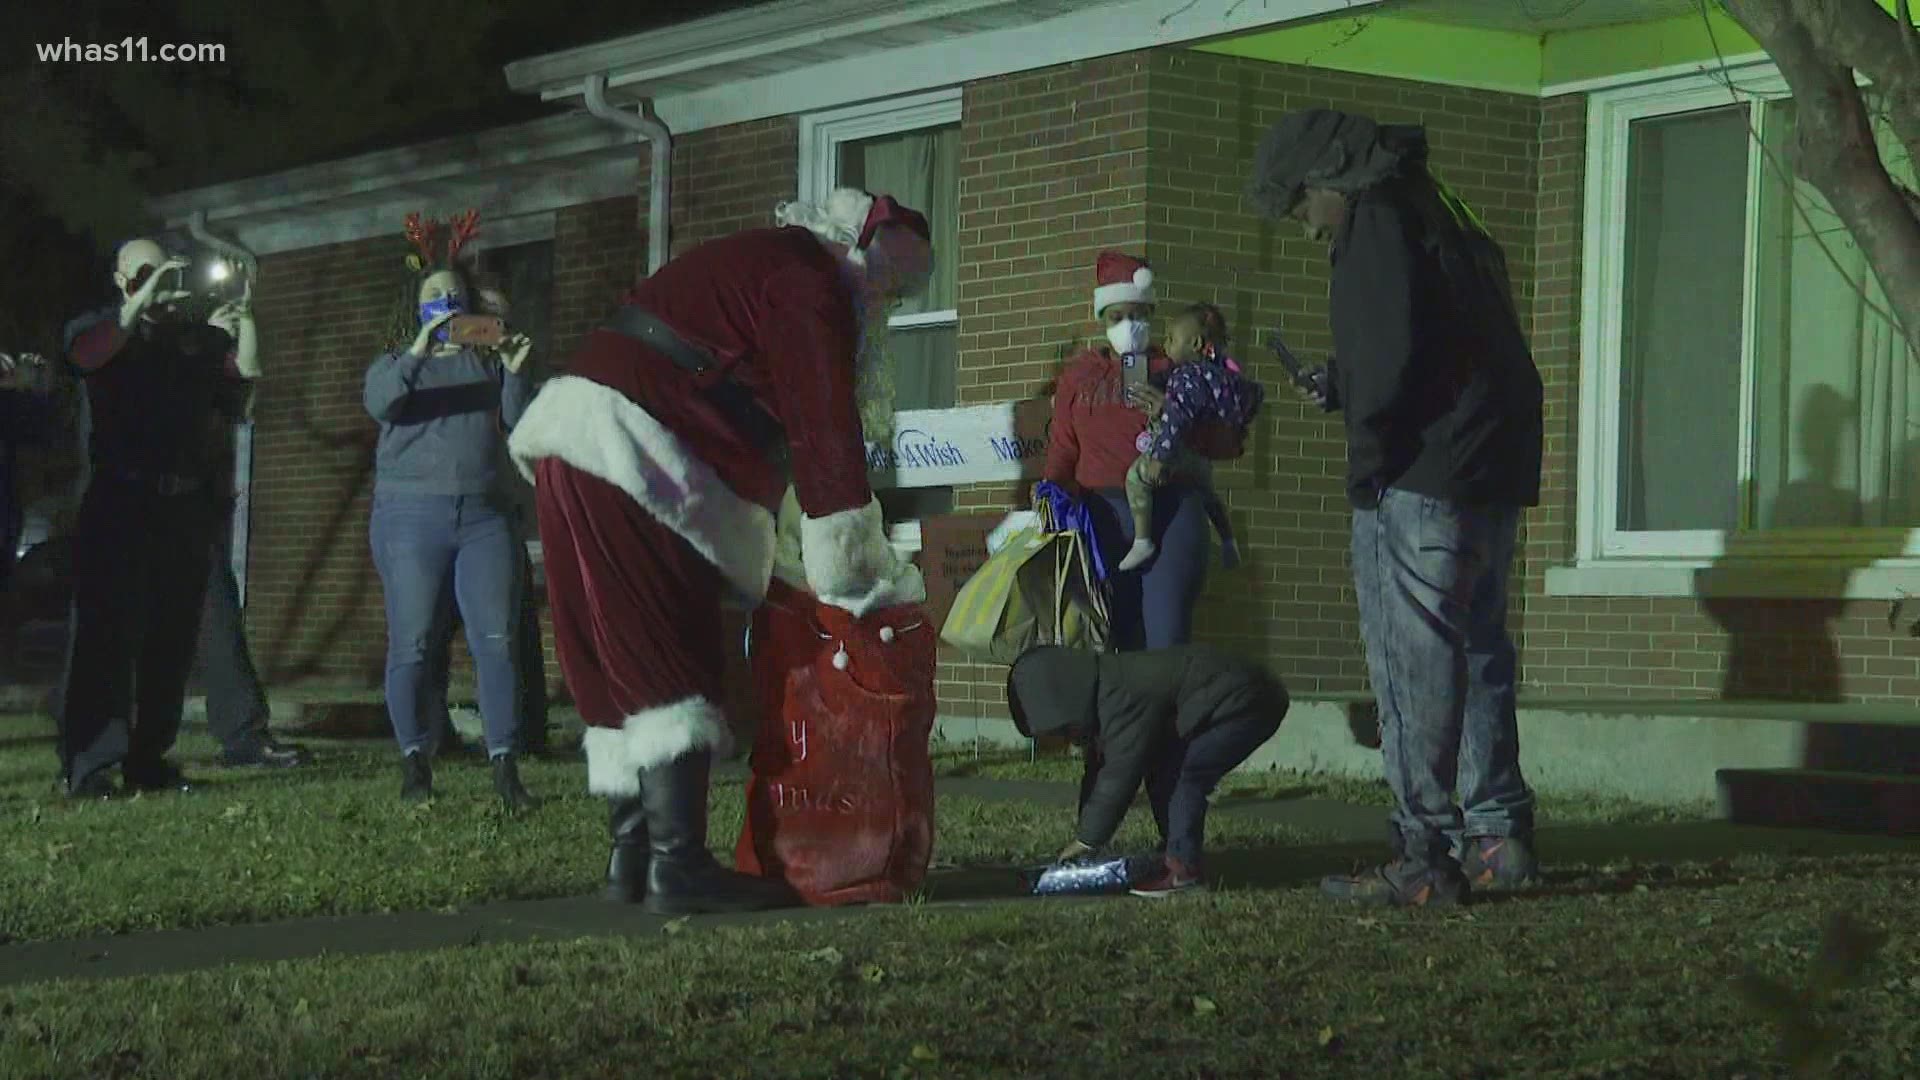 One Louisville boy got an early visit from Santa as part of the Make a Wish program.